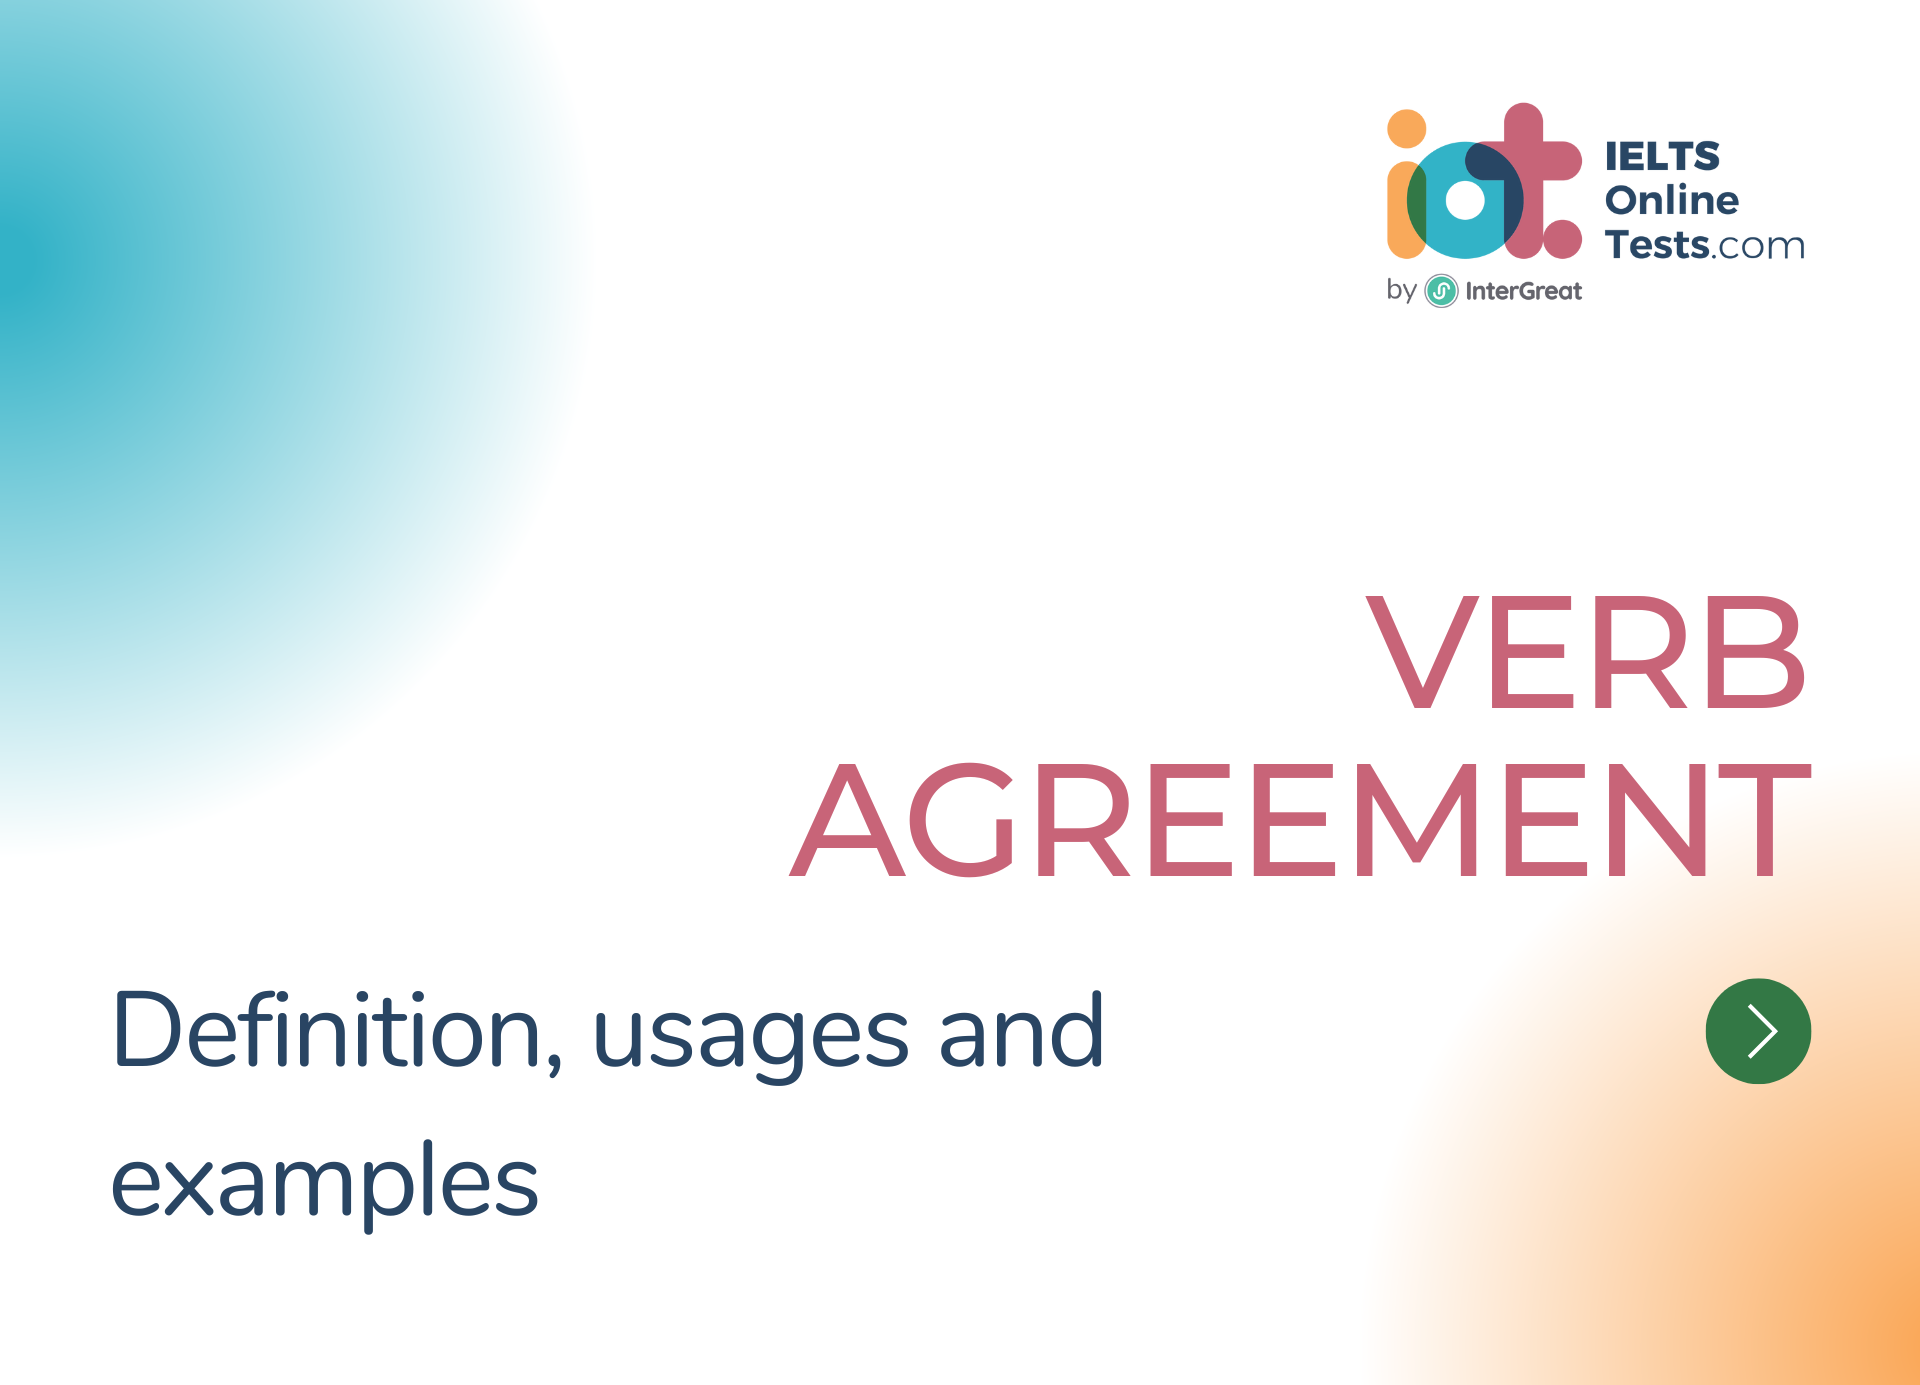 Verb agreement definition and examples